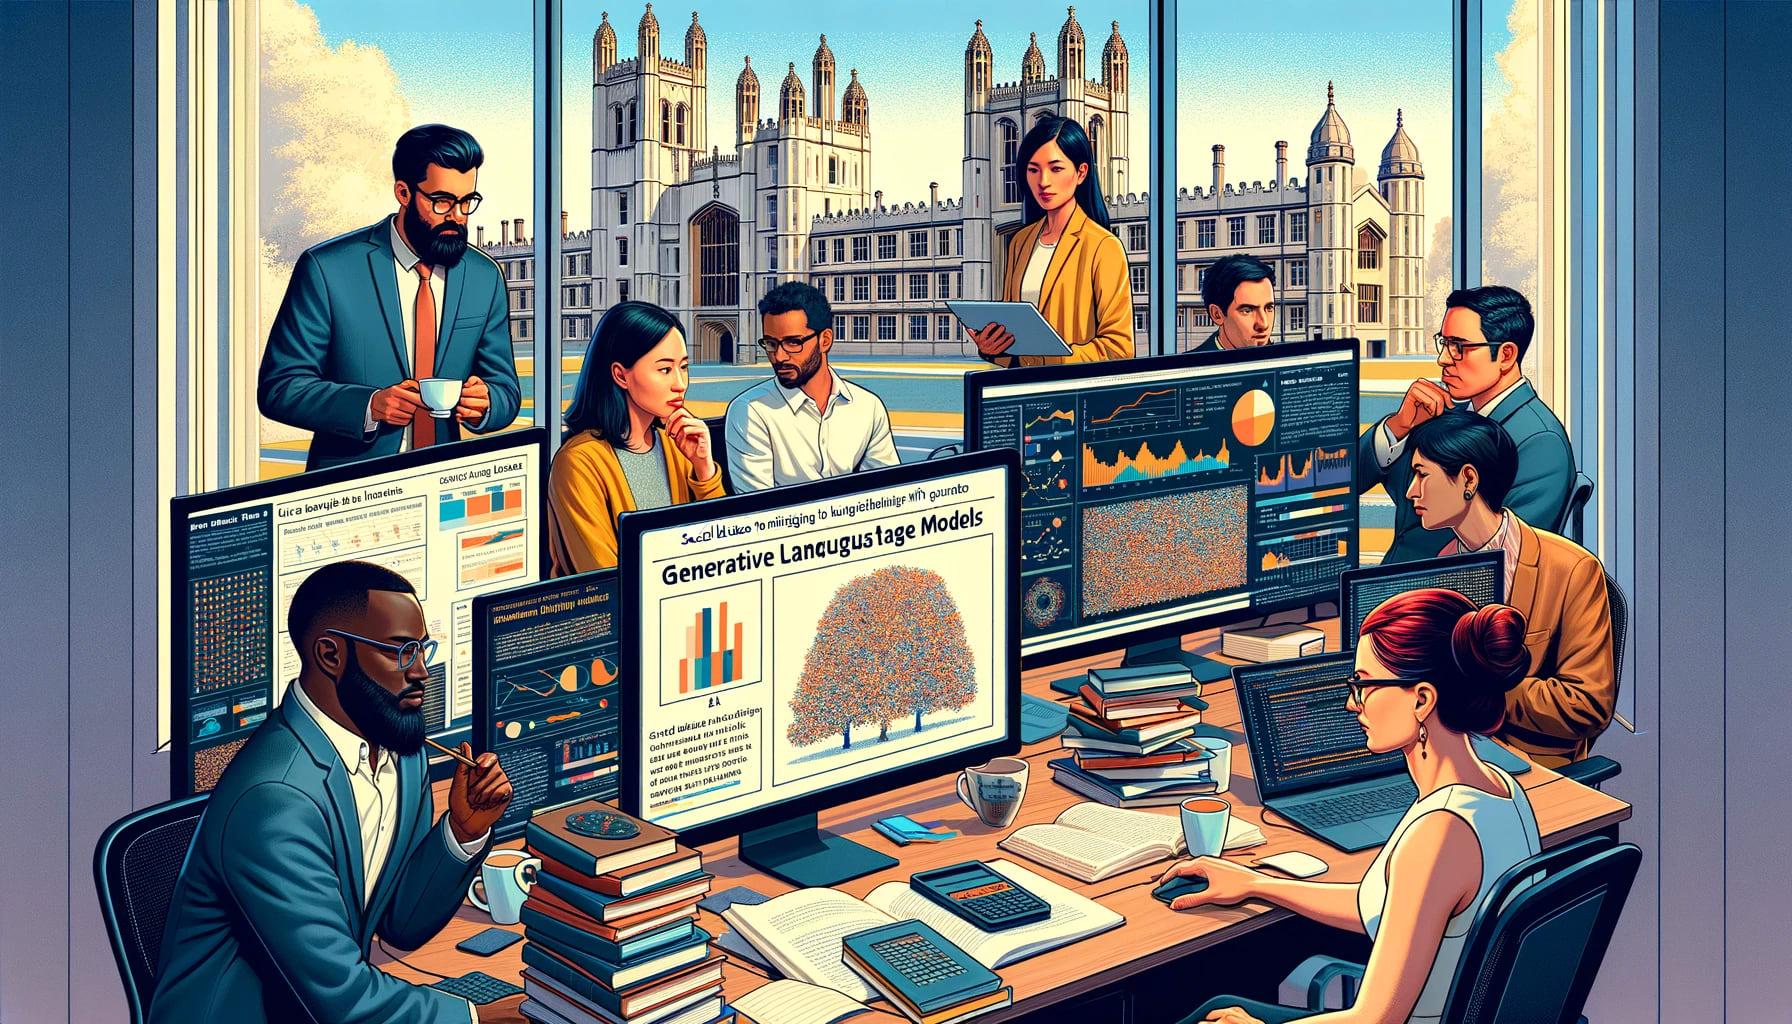 An intricate digital illustration portrays a bustling modern research office where a diverse team of data scientists and technologists are deeply engrossed in their work on generative language models. The workspace is illuminated by natural light streaming through large windows that offer a majestic view of the historic Westminster Palace.